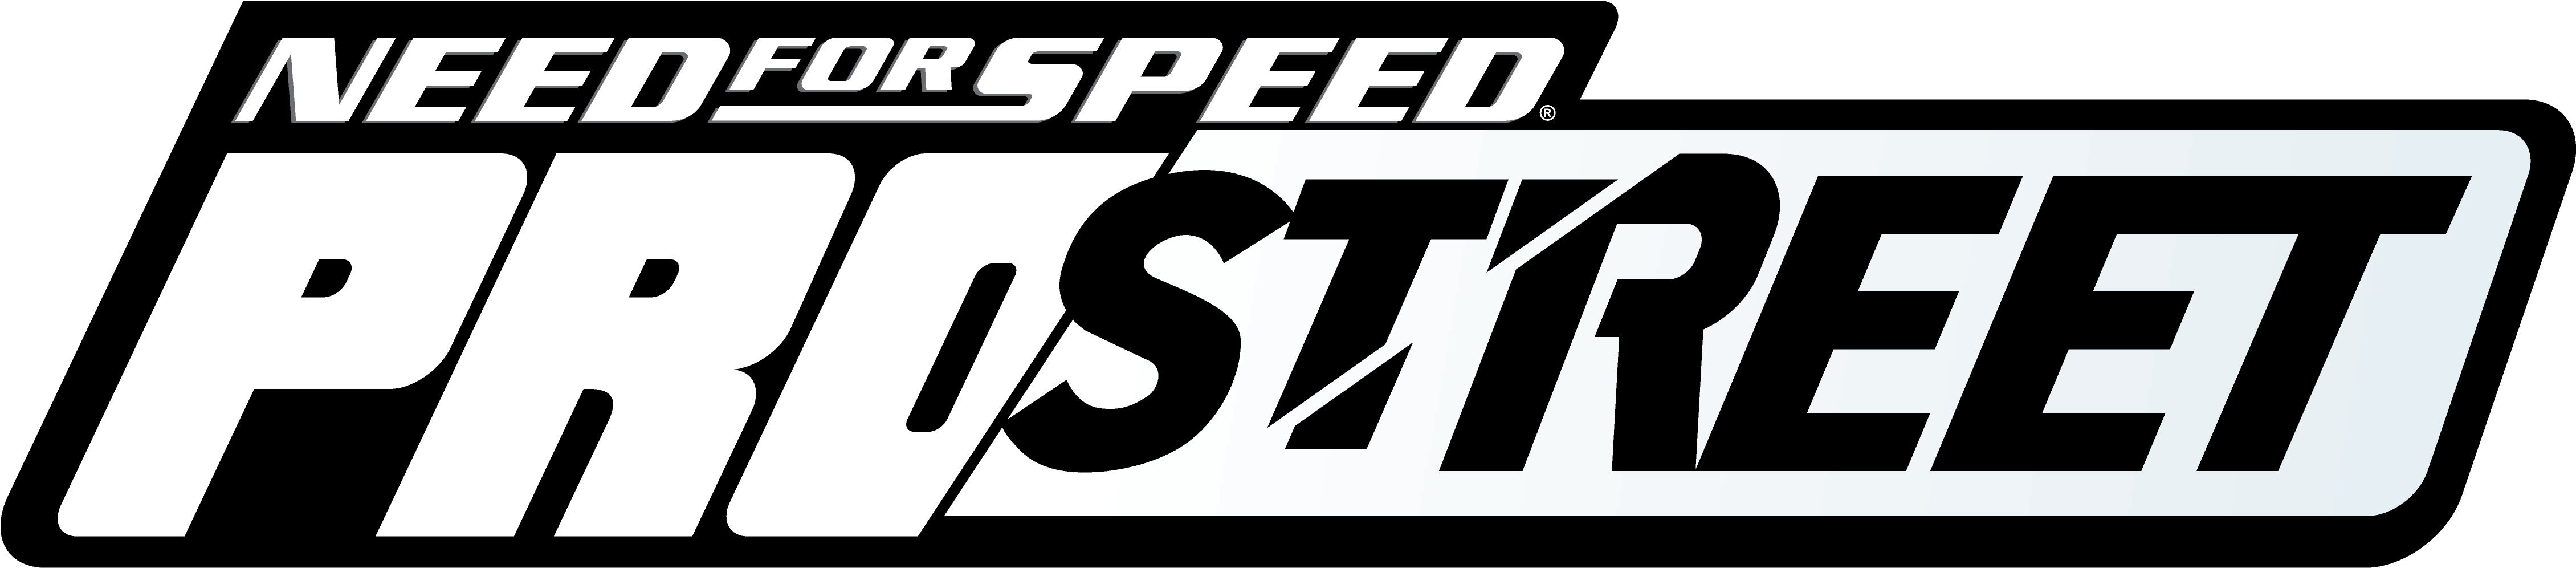 Need For Speed Logo PNG HD Photos